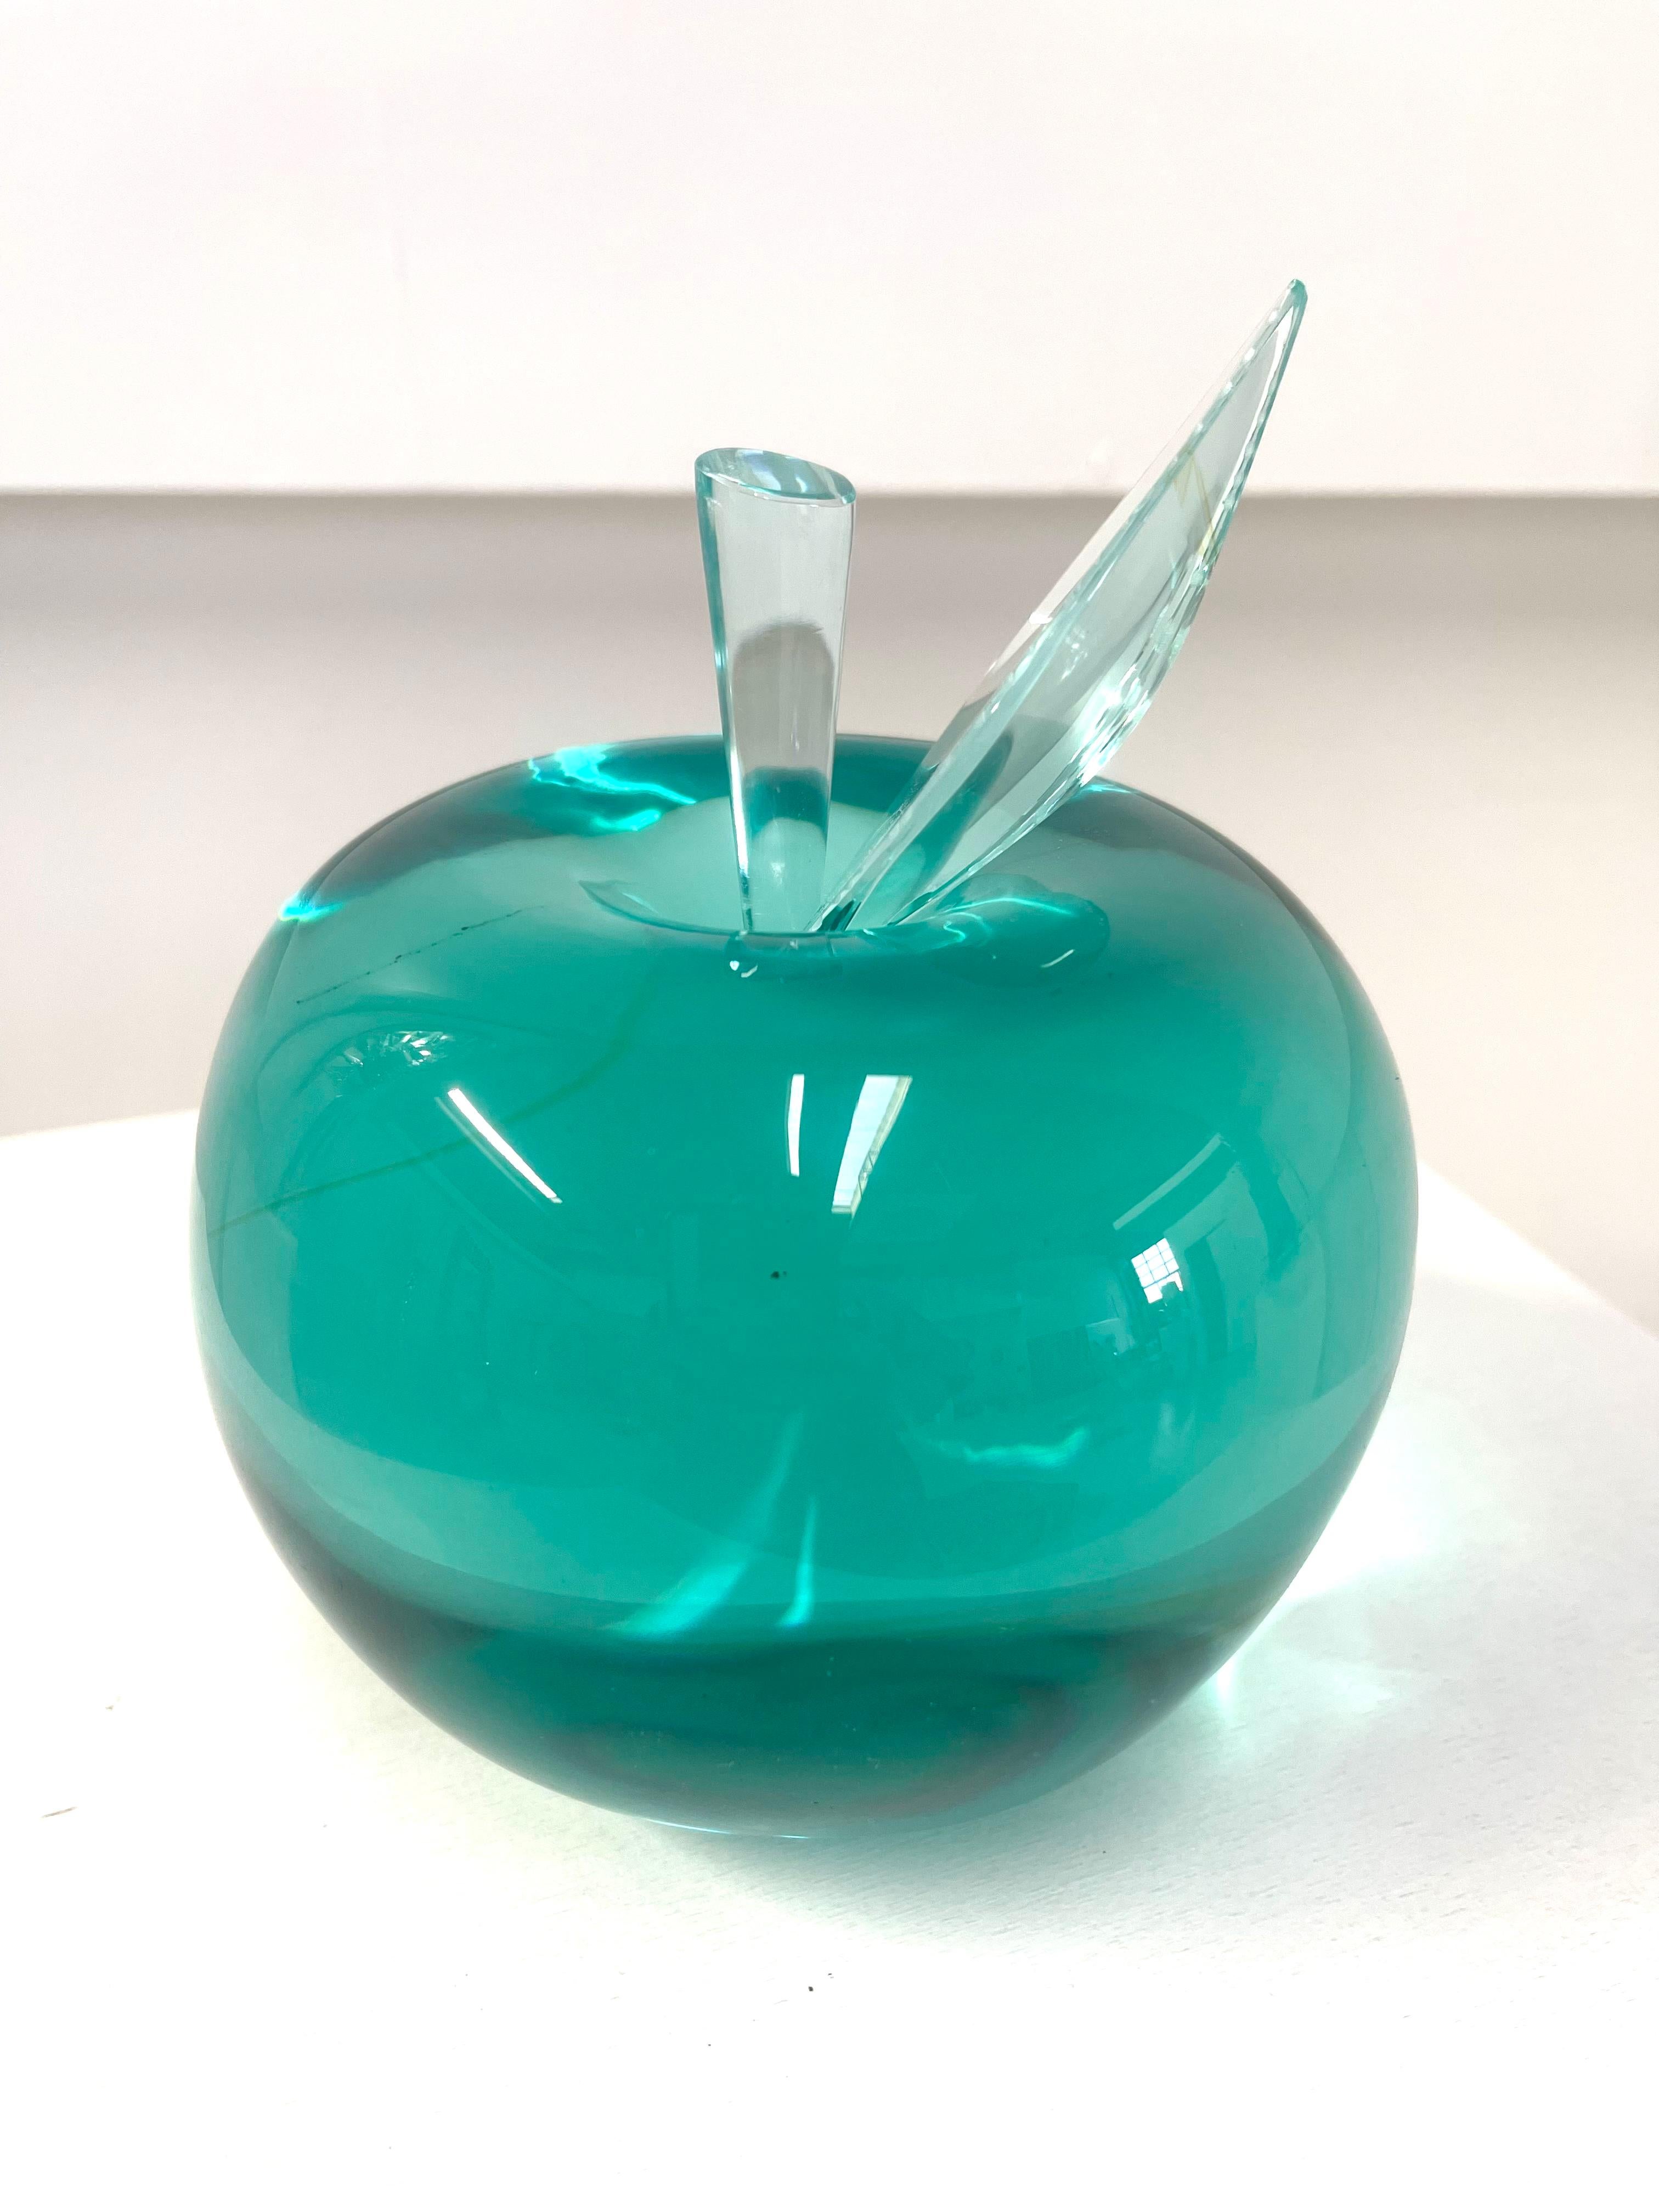 Contemporary 'Apple' Unique Sculpture in Handmade Aquamarine Crystal by Ghiró Studio For Sale